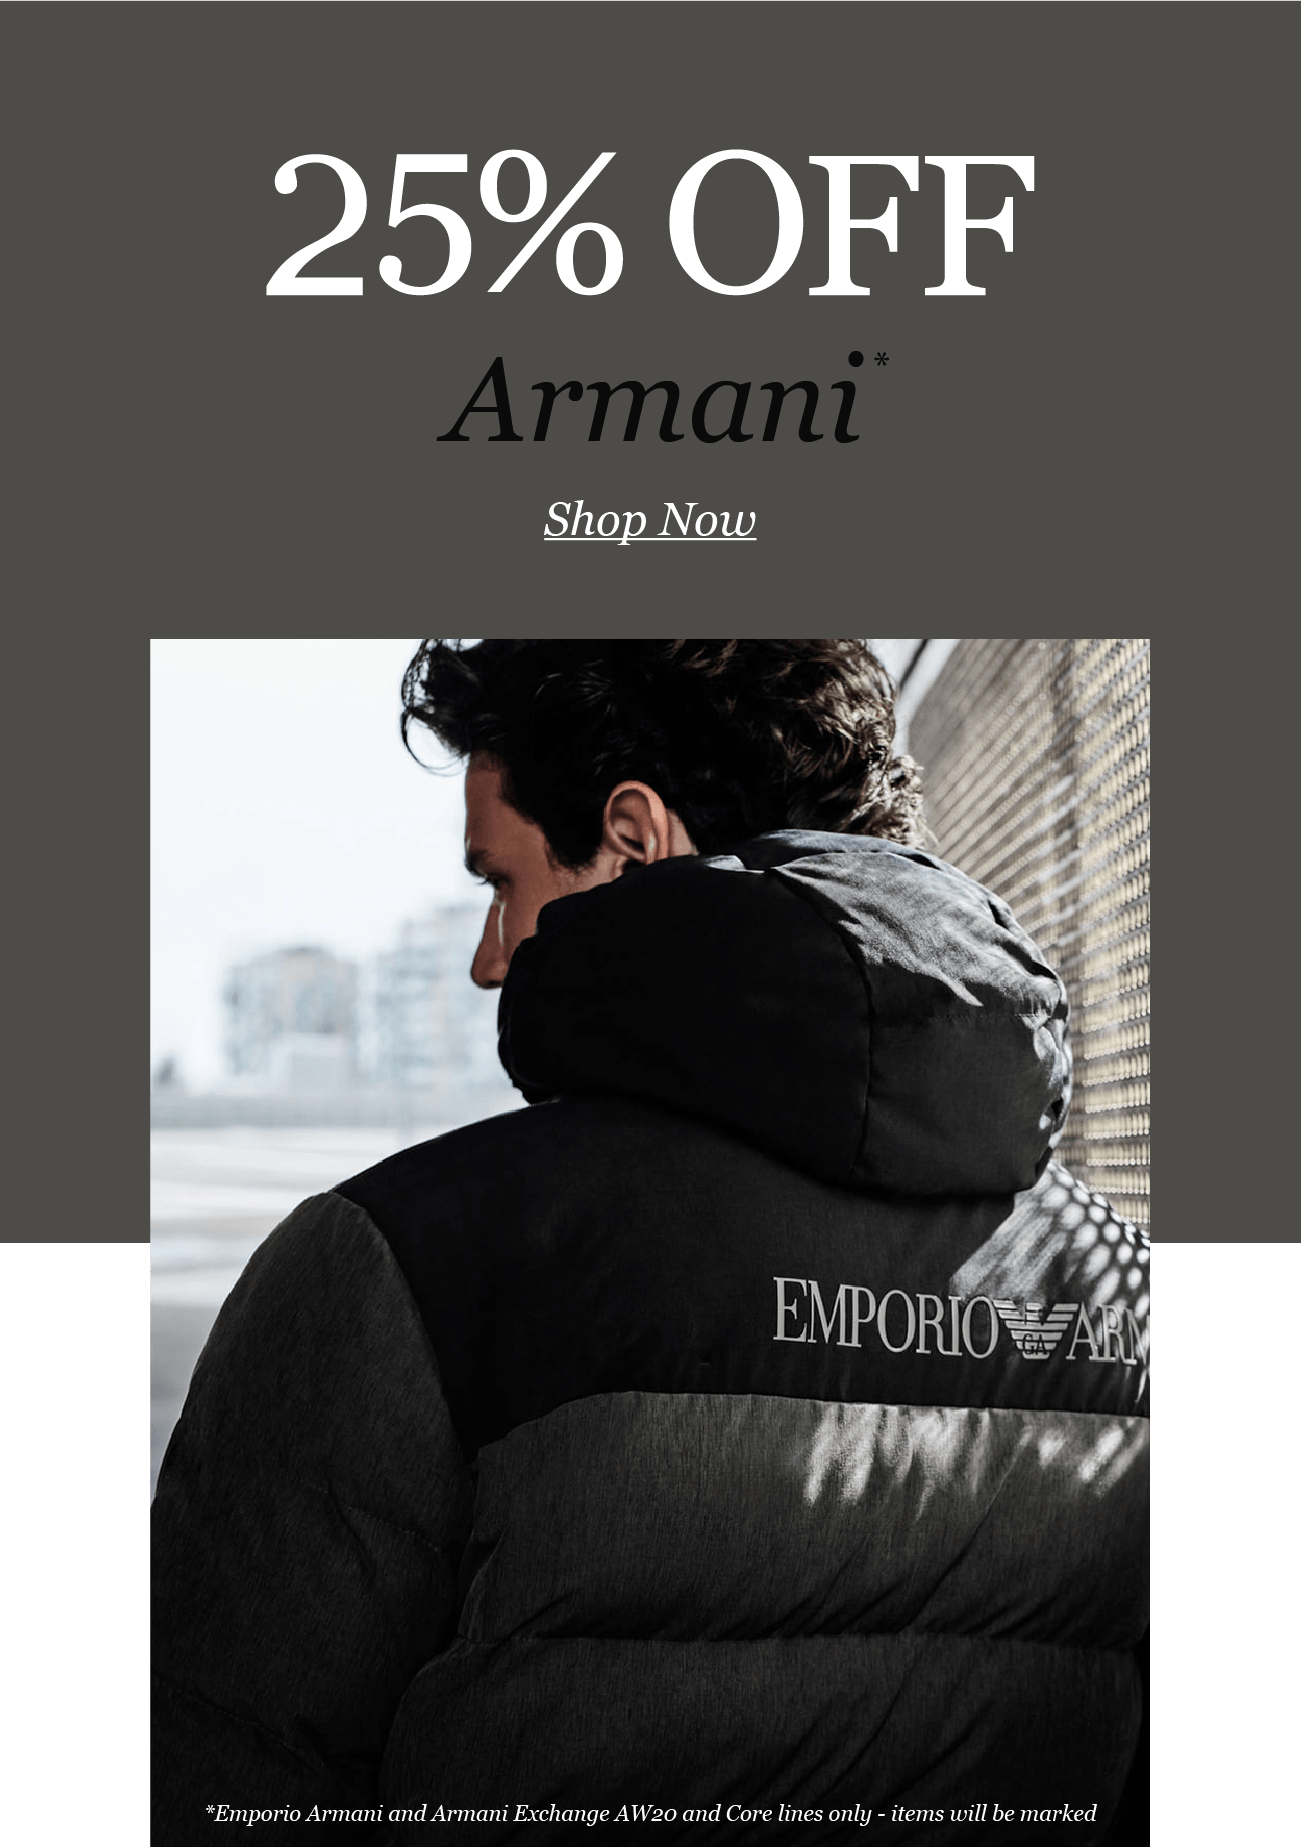 25% OFF
Armani
Shop Now

*Emporio Armani and Armani Exchange AW20 and Core lines only - items will be marked